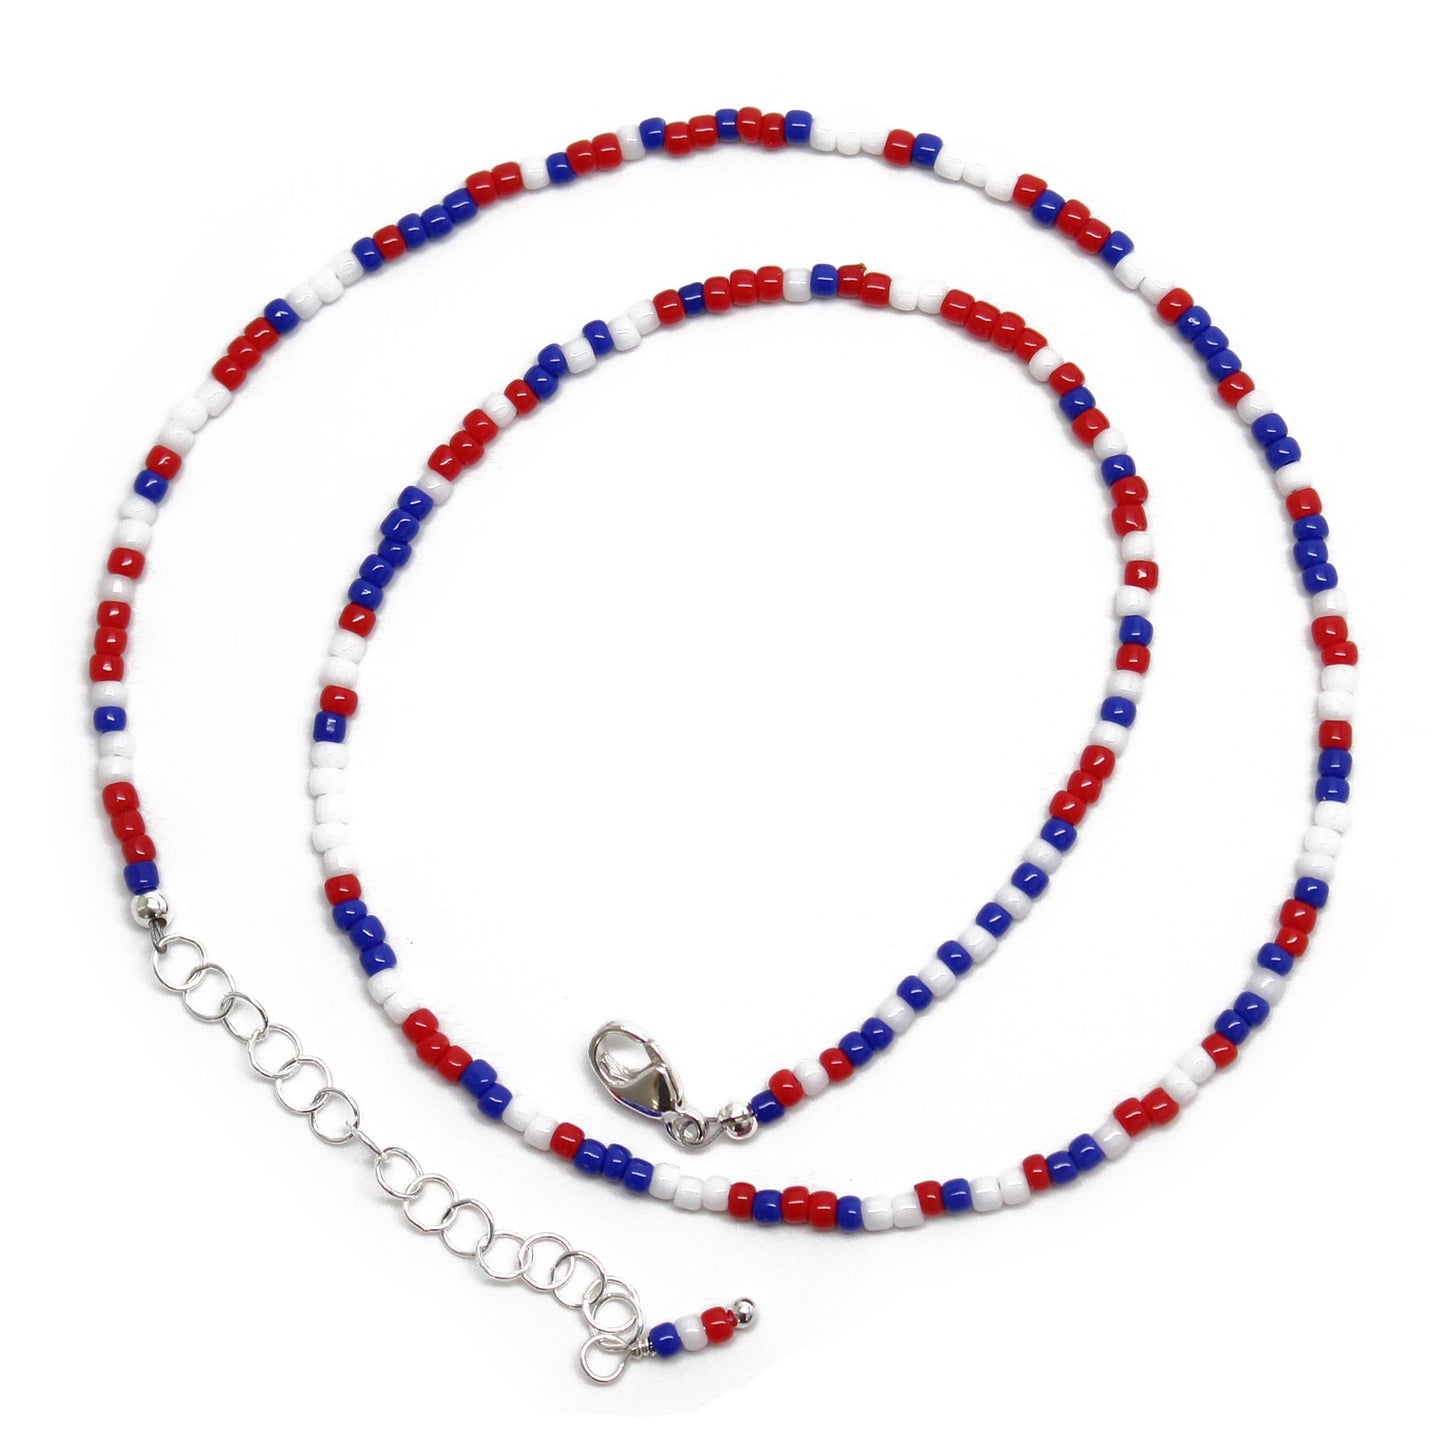 Red White and Blue Choker Necklace